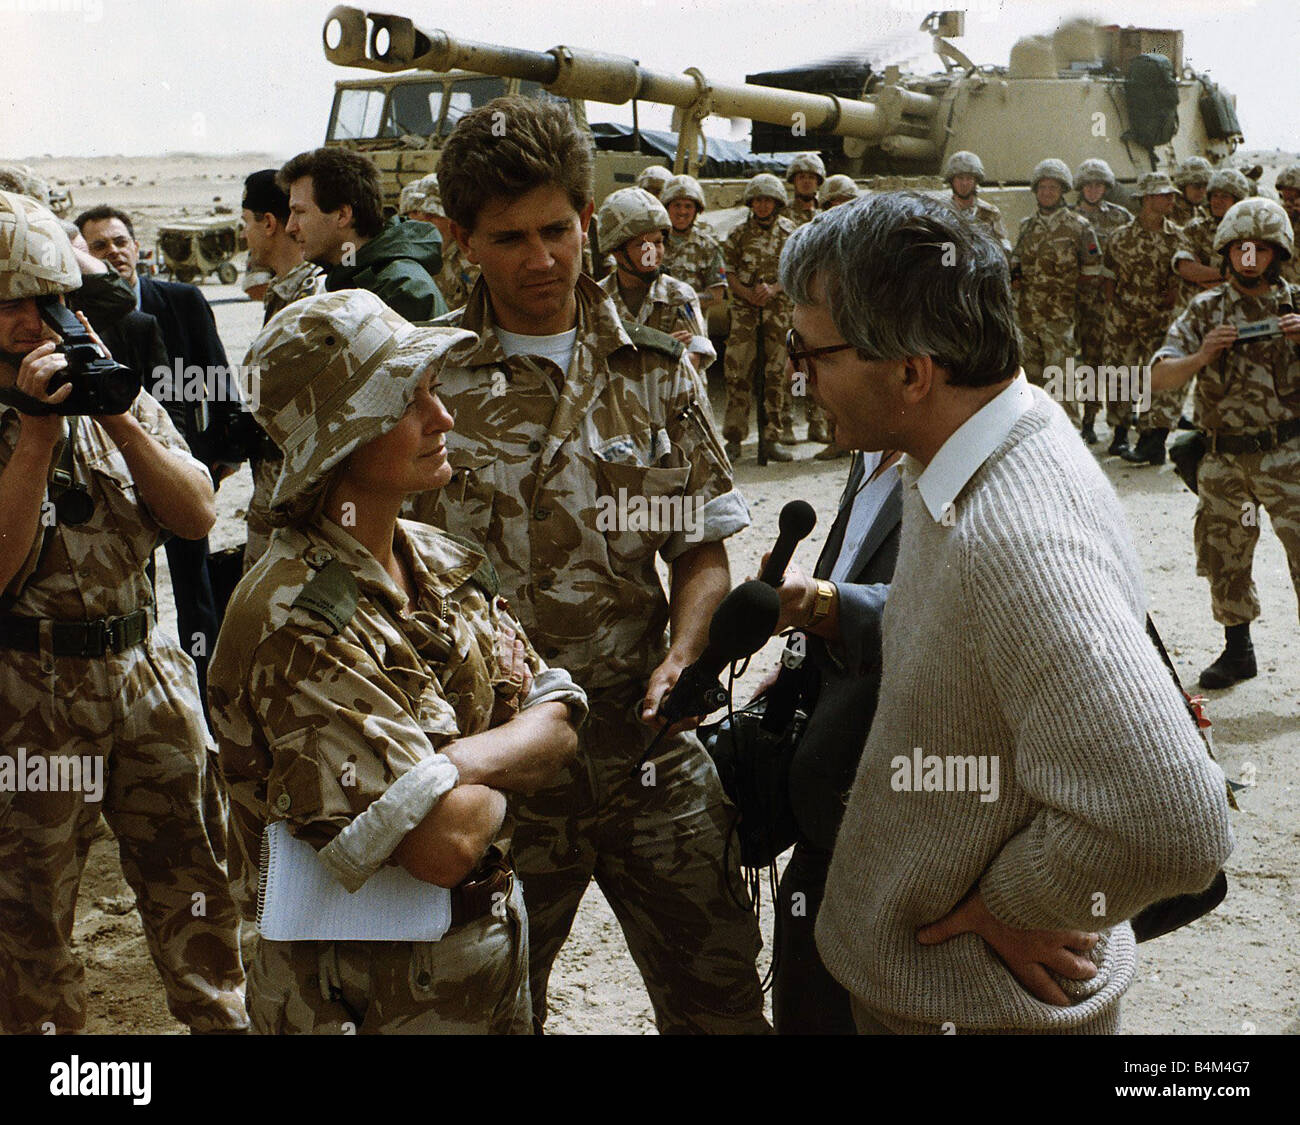 British Prime Minister John Major seen here being interview by the BBC s chief foreign corrospondent Kate Adie after visiting troops in the desert during the build up the Operation Desert Storm 1991 Stock Photo